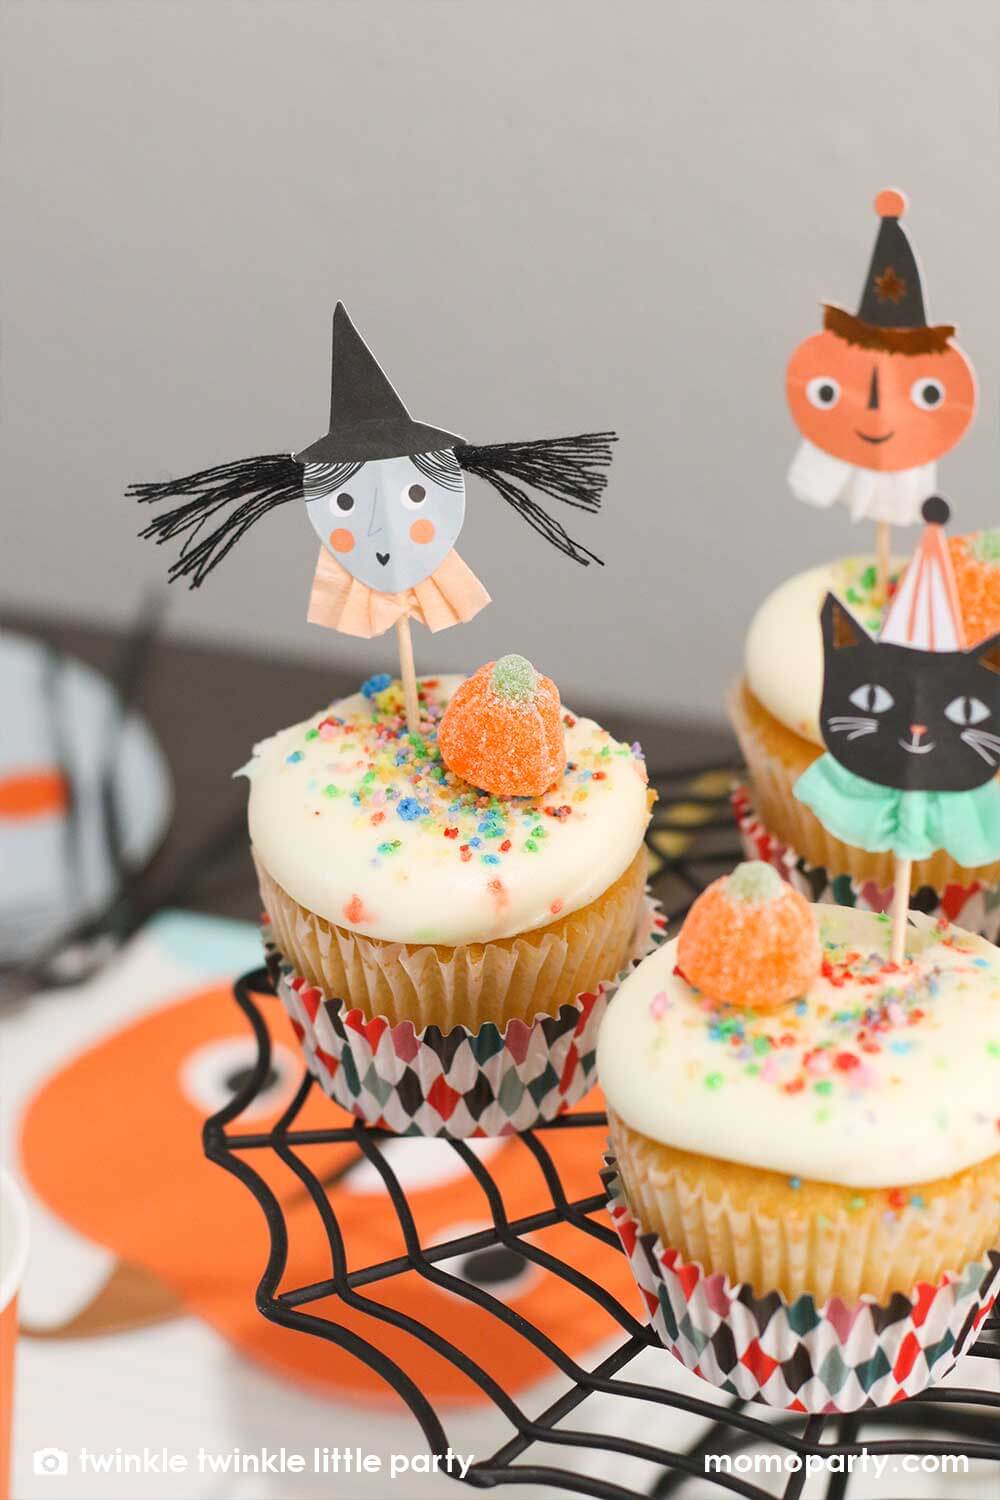 Kid's Halloween party table filled with Halloween themed party supplies including a set of cupcakes decorated with Halloween character toppers including a black cat, a skull, a pumpkin, and a witch on a spider cobweb shaped cupcake stand, creating a spooky vibe for this Halloween season!